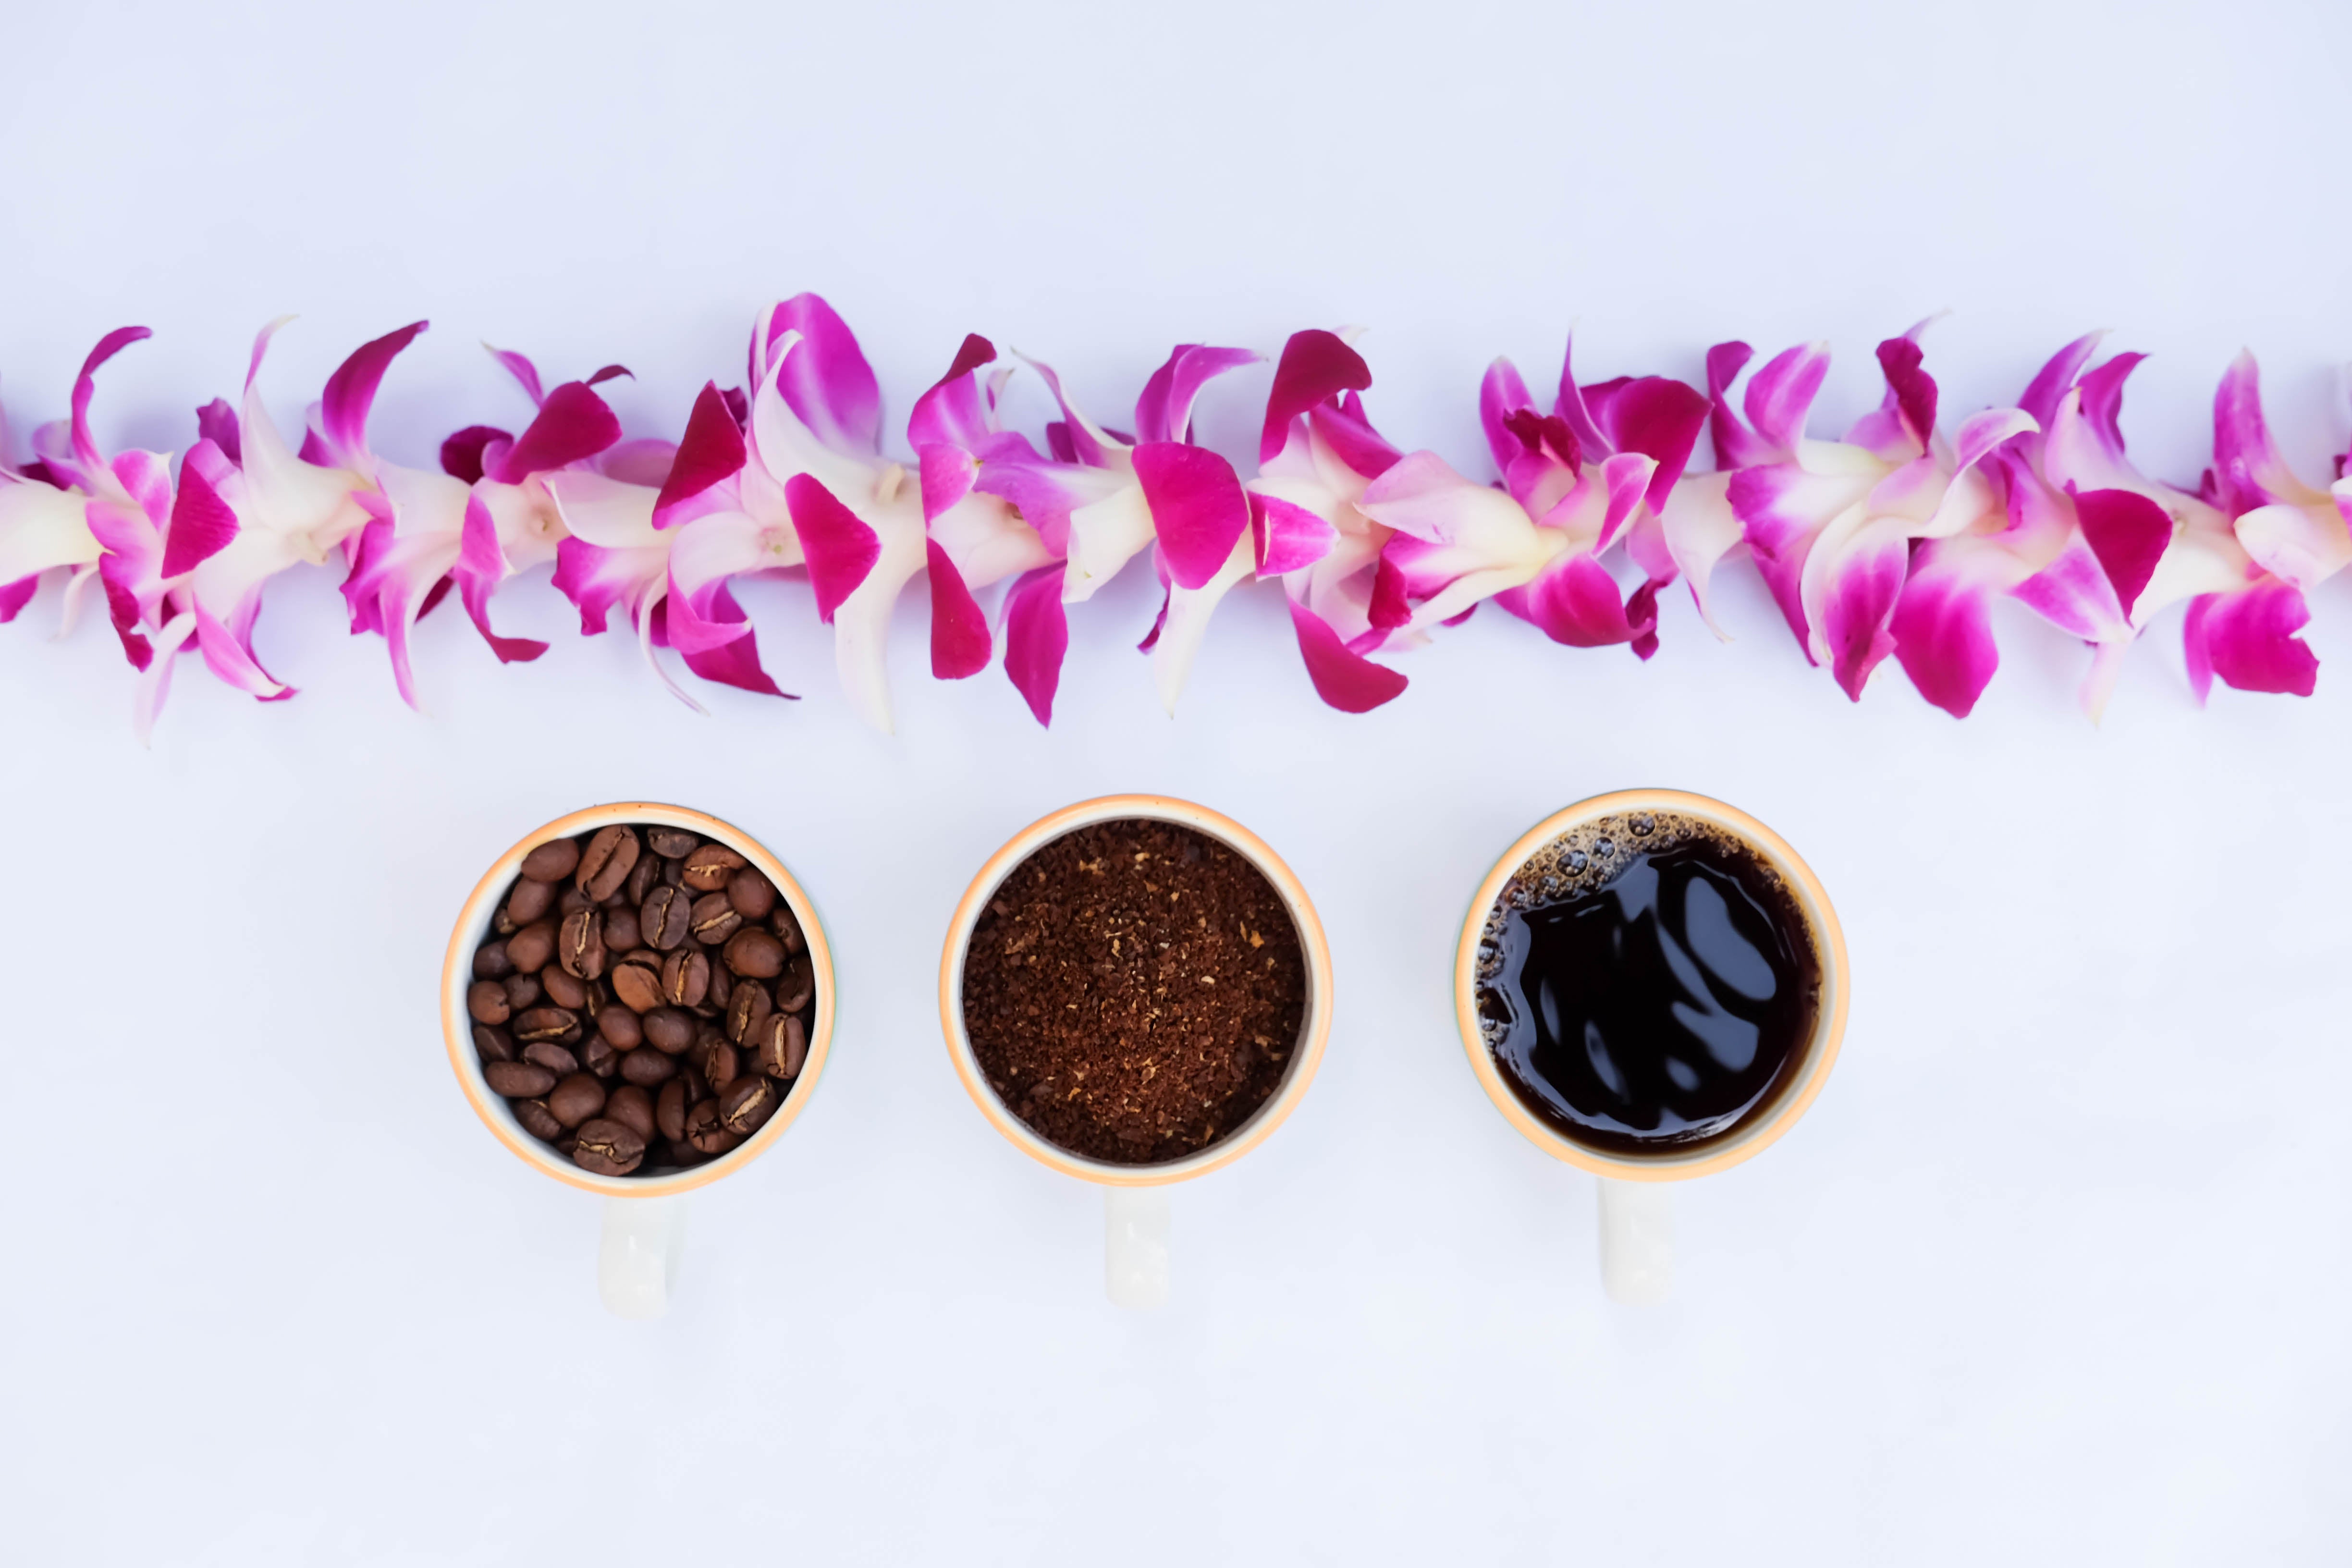 An orchid lei next to whole, ground, and brewed Kona coffee beans